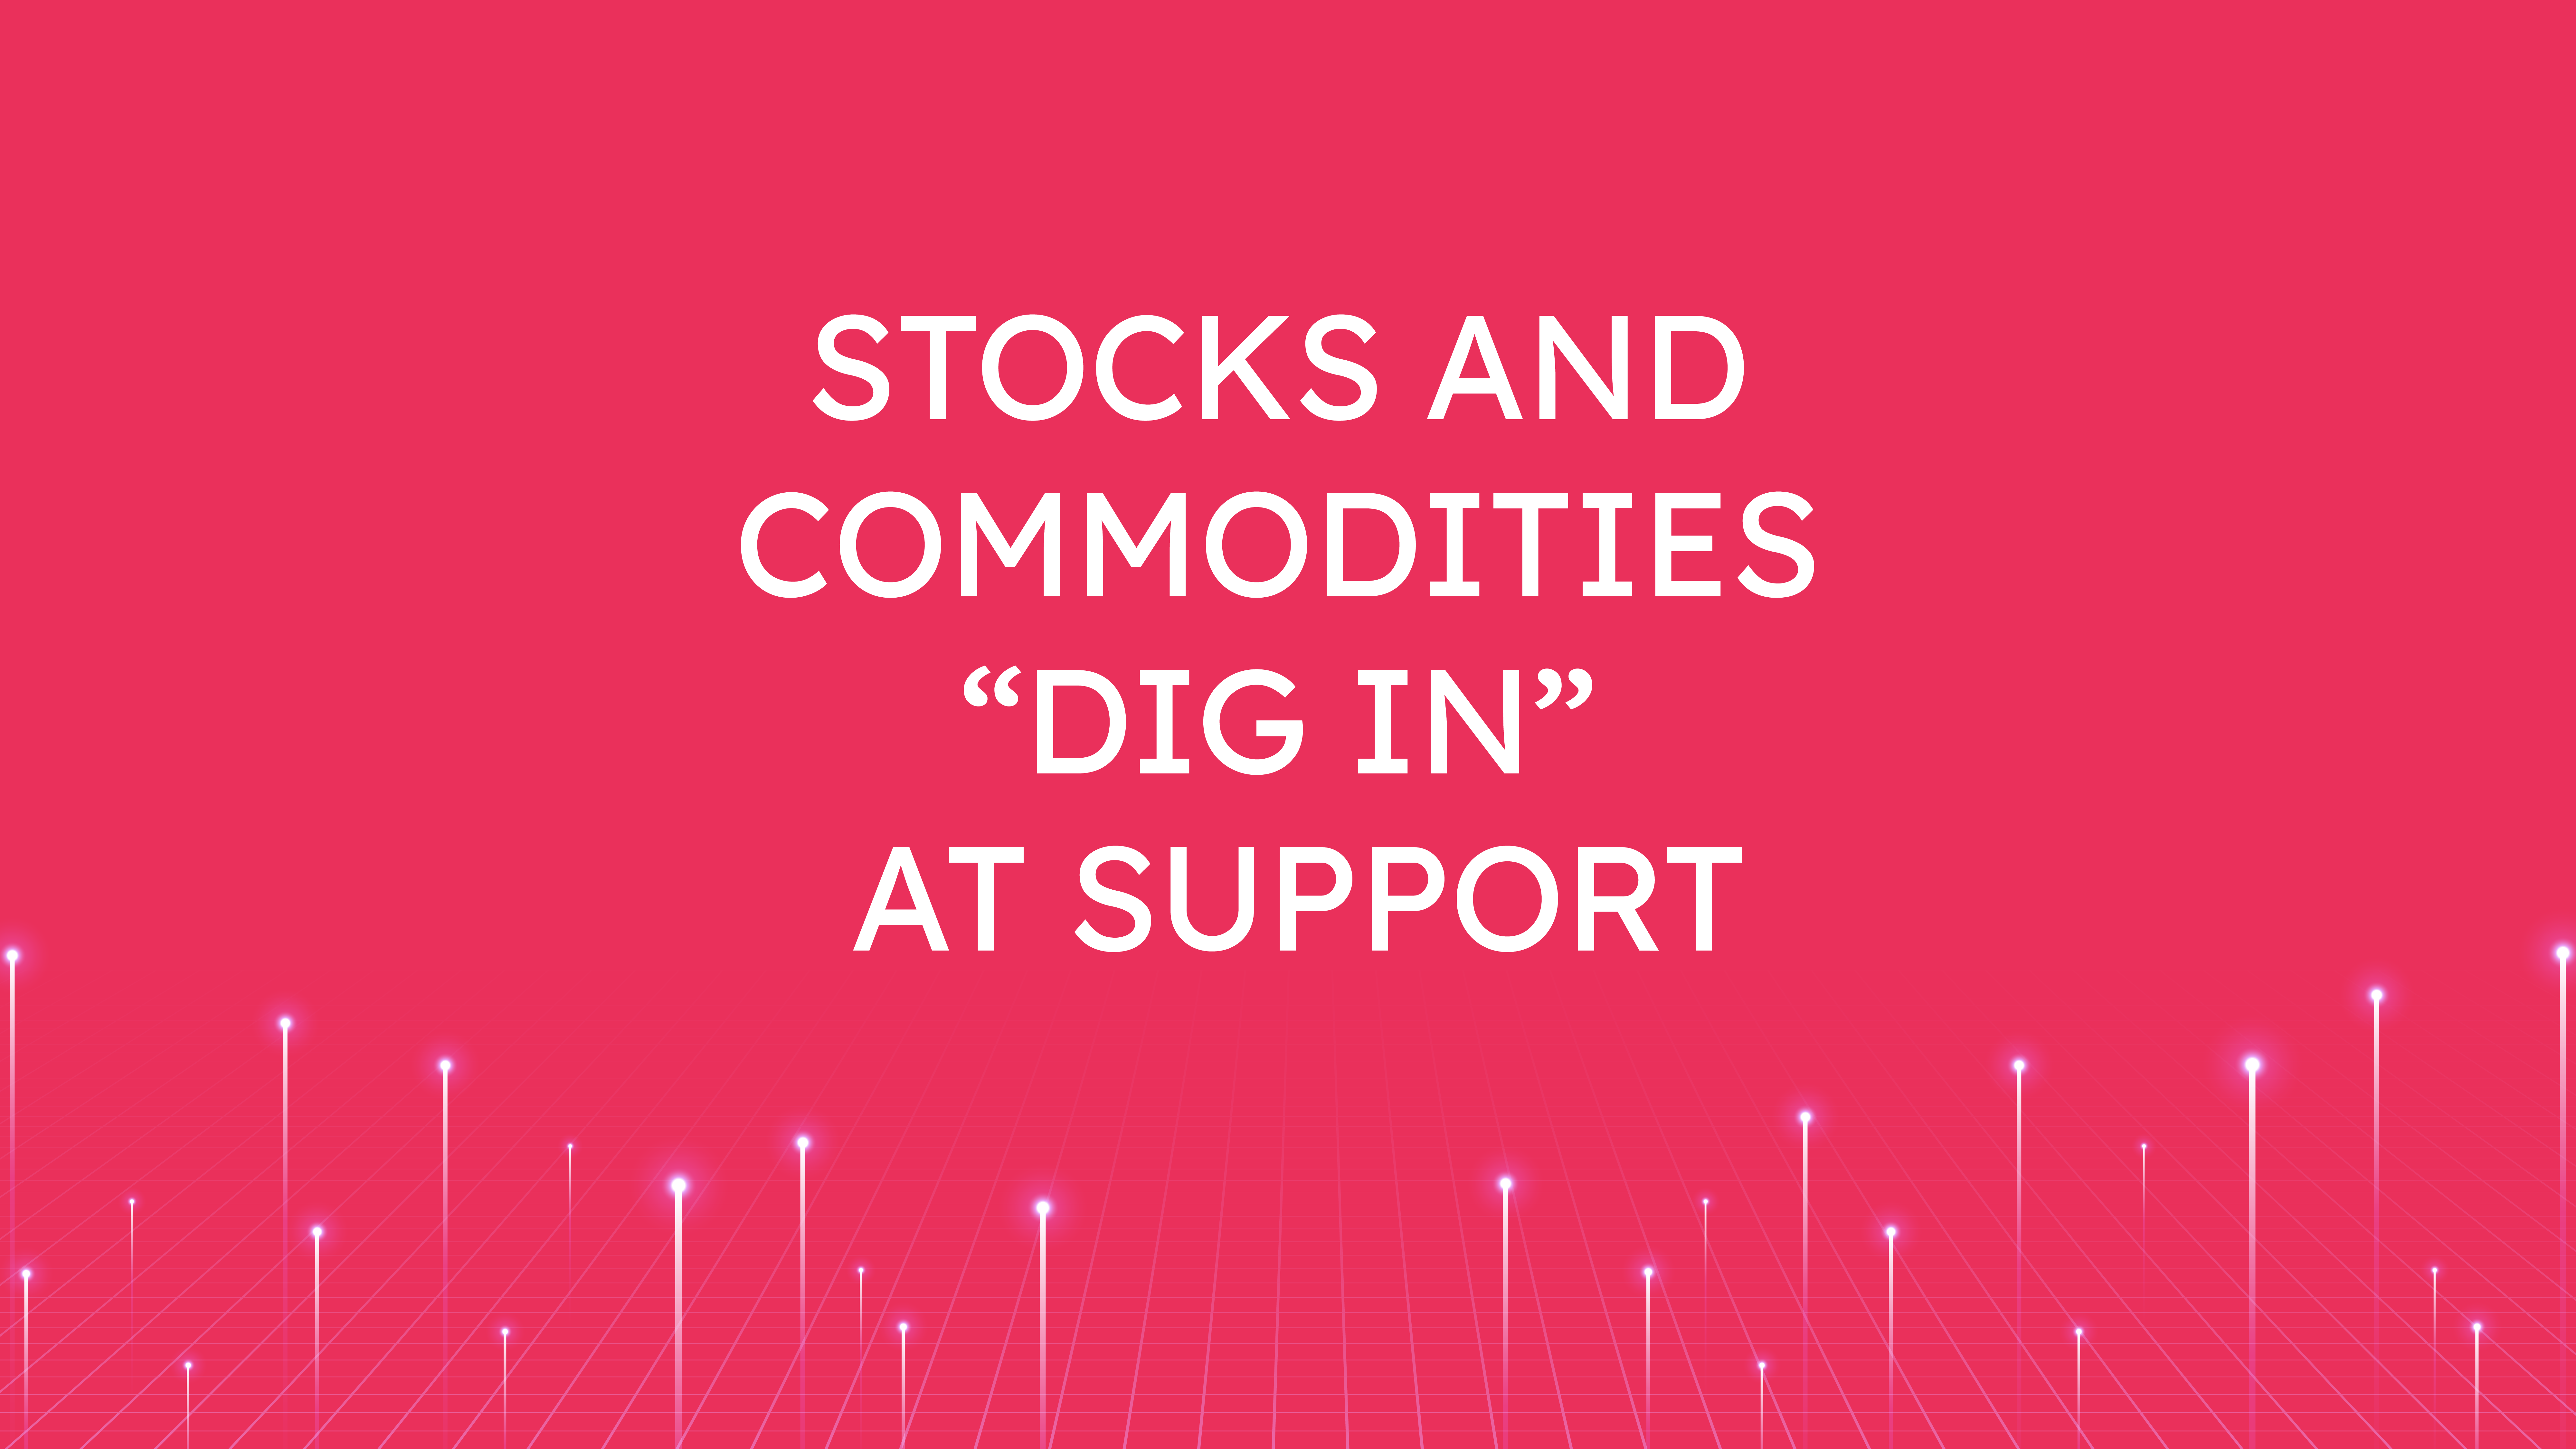 Stocks and Commodities  “Dig In” at Support